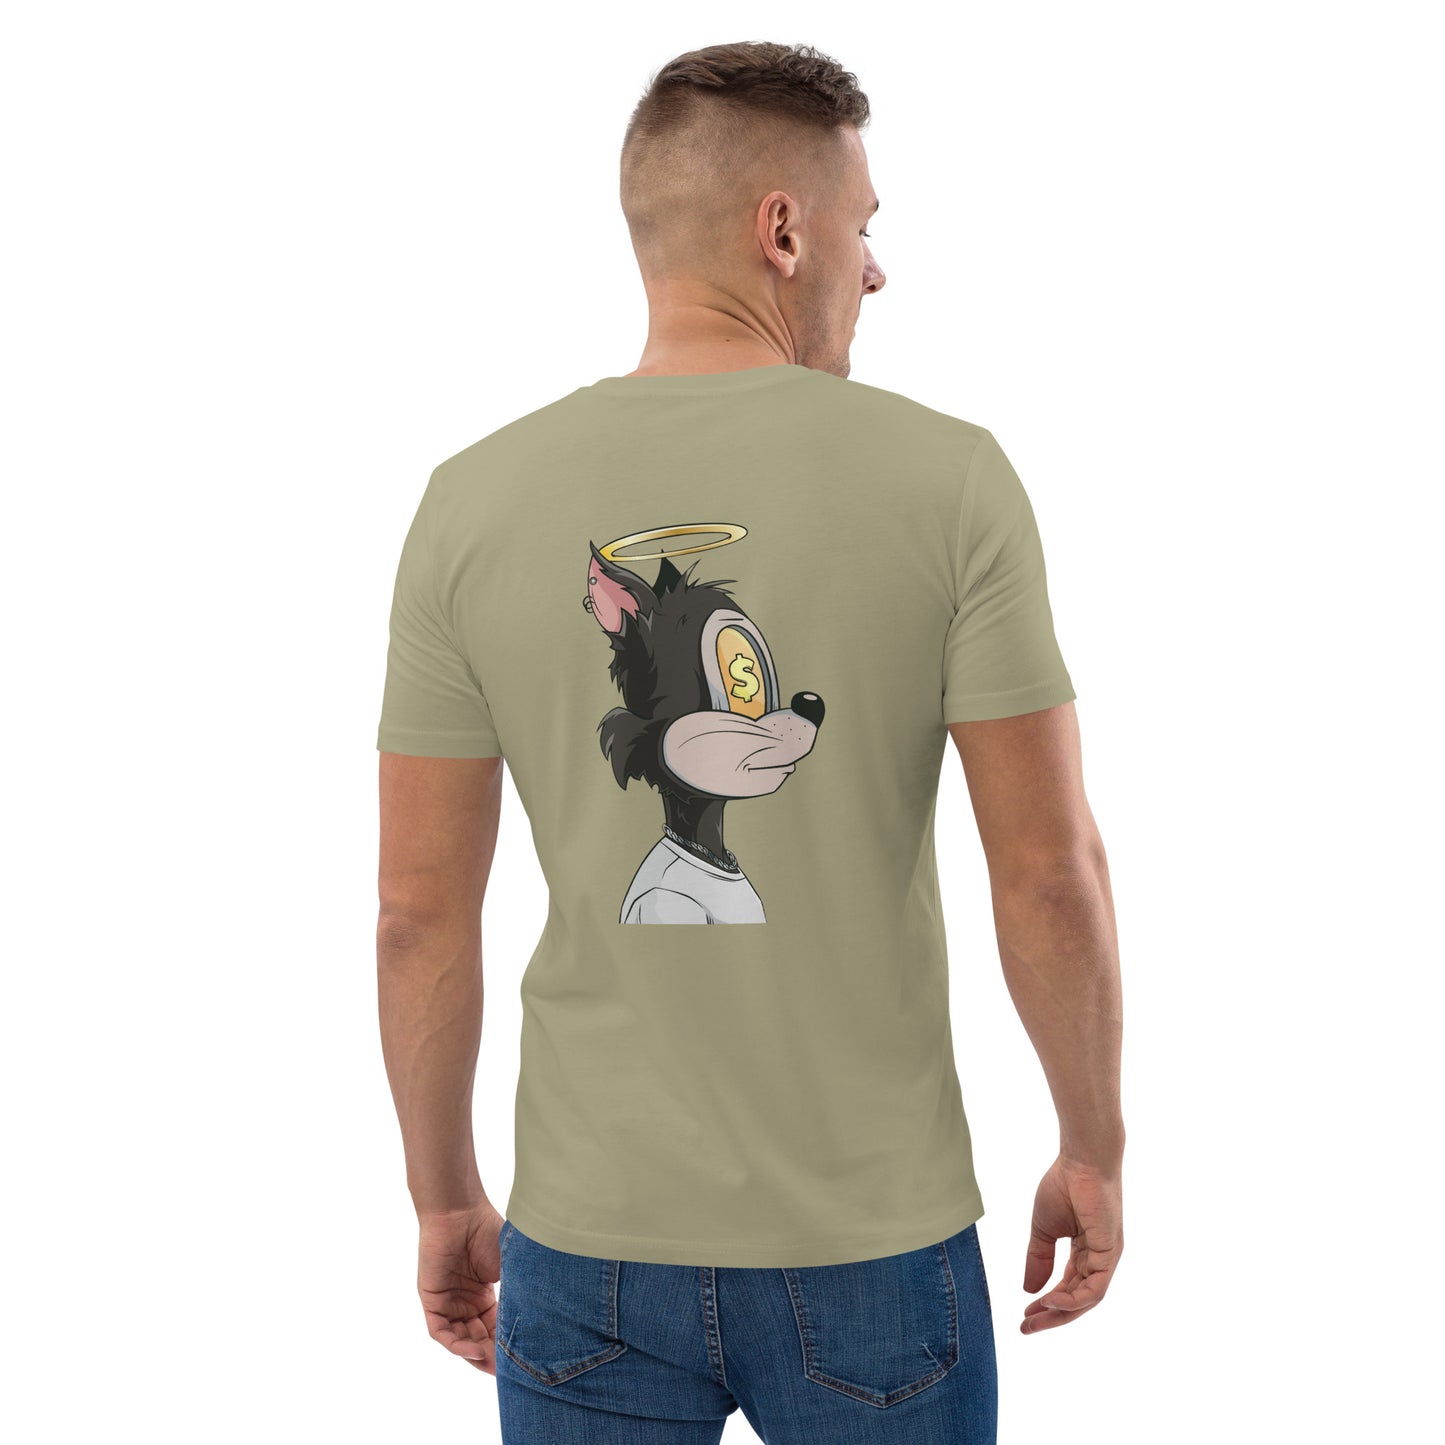 Unisex organic cotton t-shirt feat. TOON #590  (front embroidered + rear print)